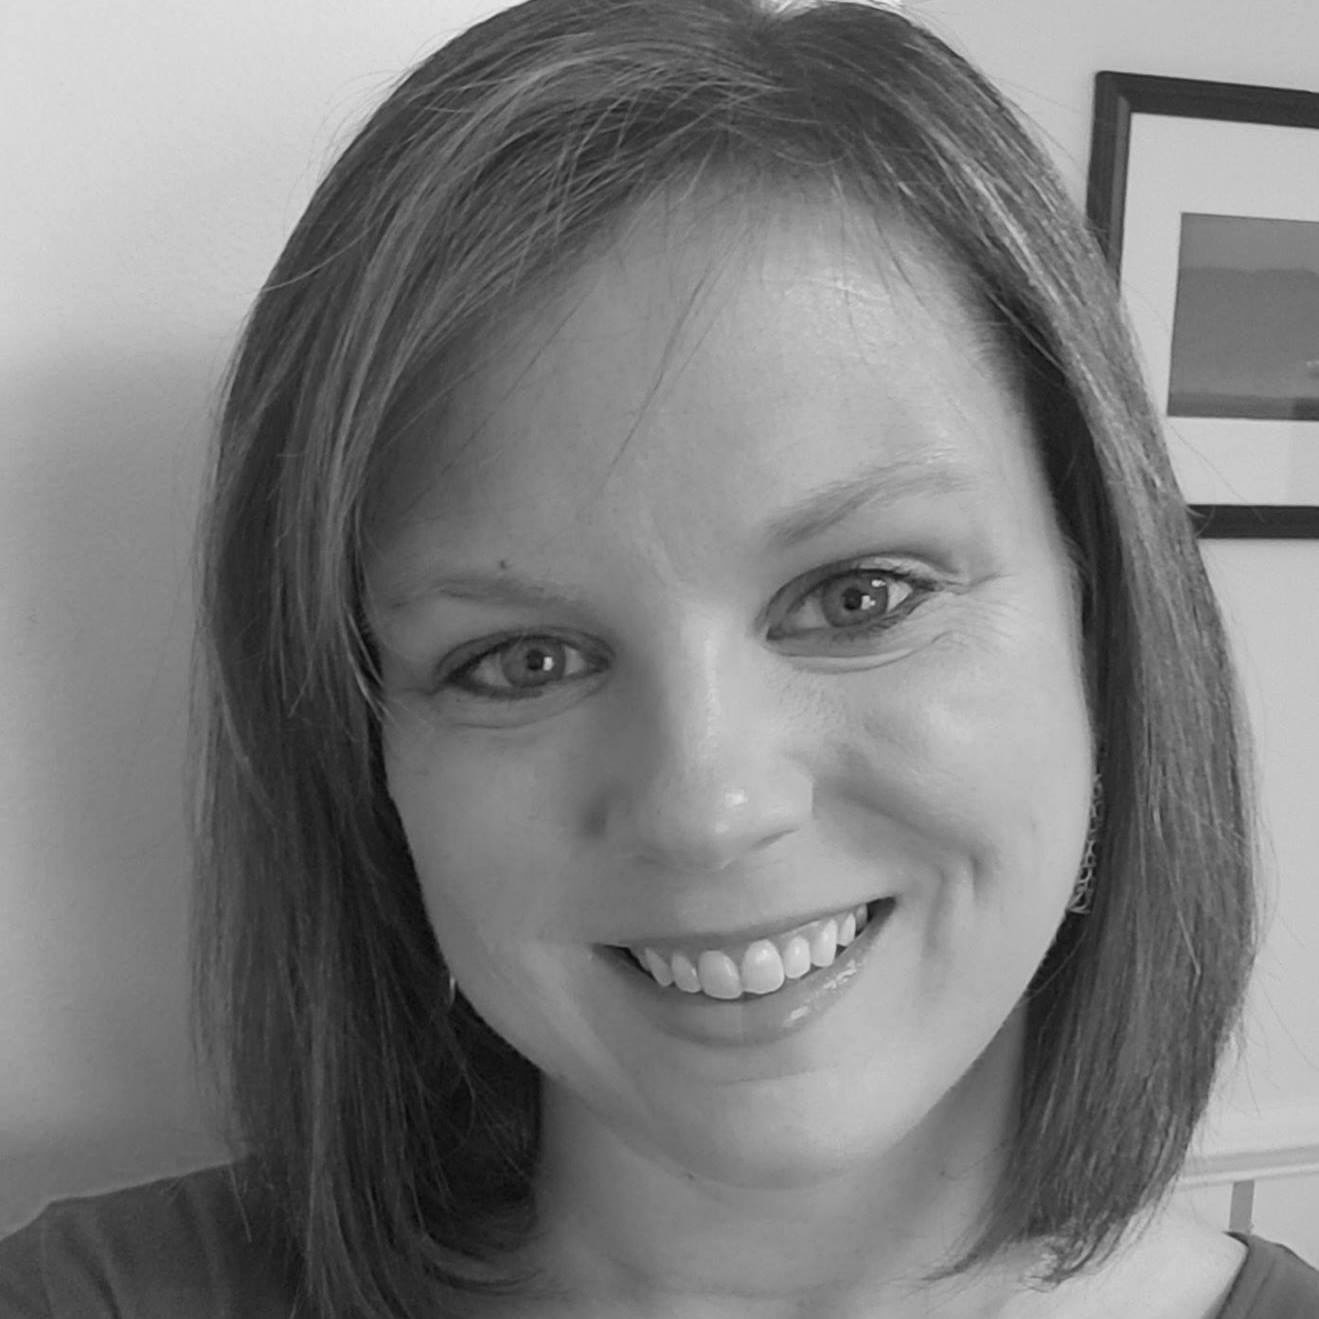 Rachel Bender has been a member of FPC since 2011. Prior to joining the staff at FPC, Rachel worked for 15 years as a writer and editor. When she isn’t working, Rachel enjoys spending time exploring Hampton Roads with her husband and two children.